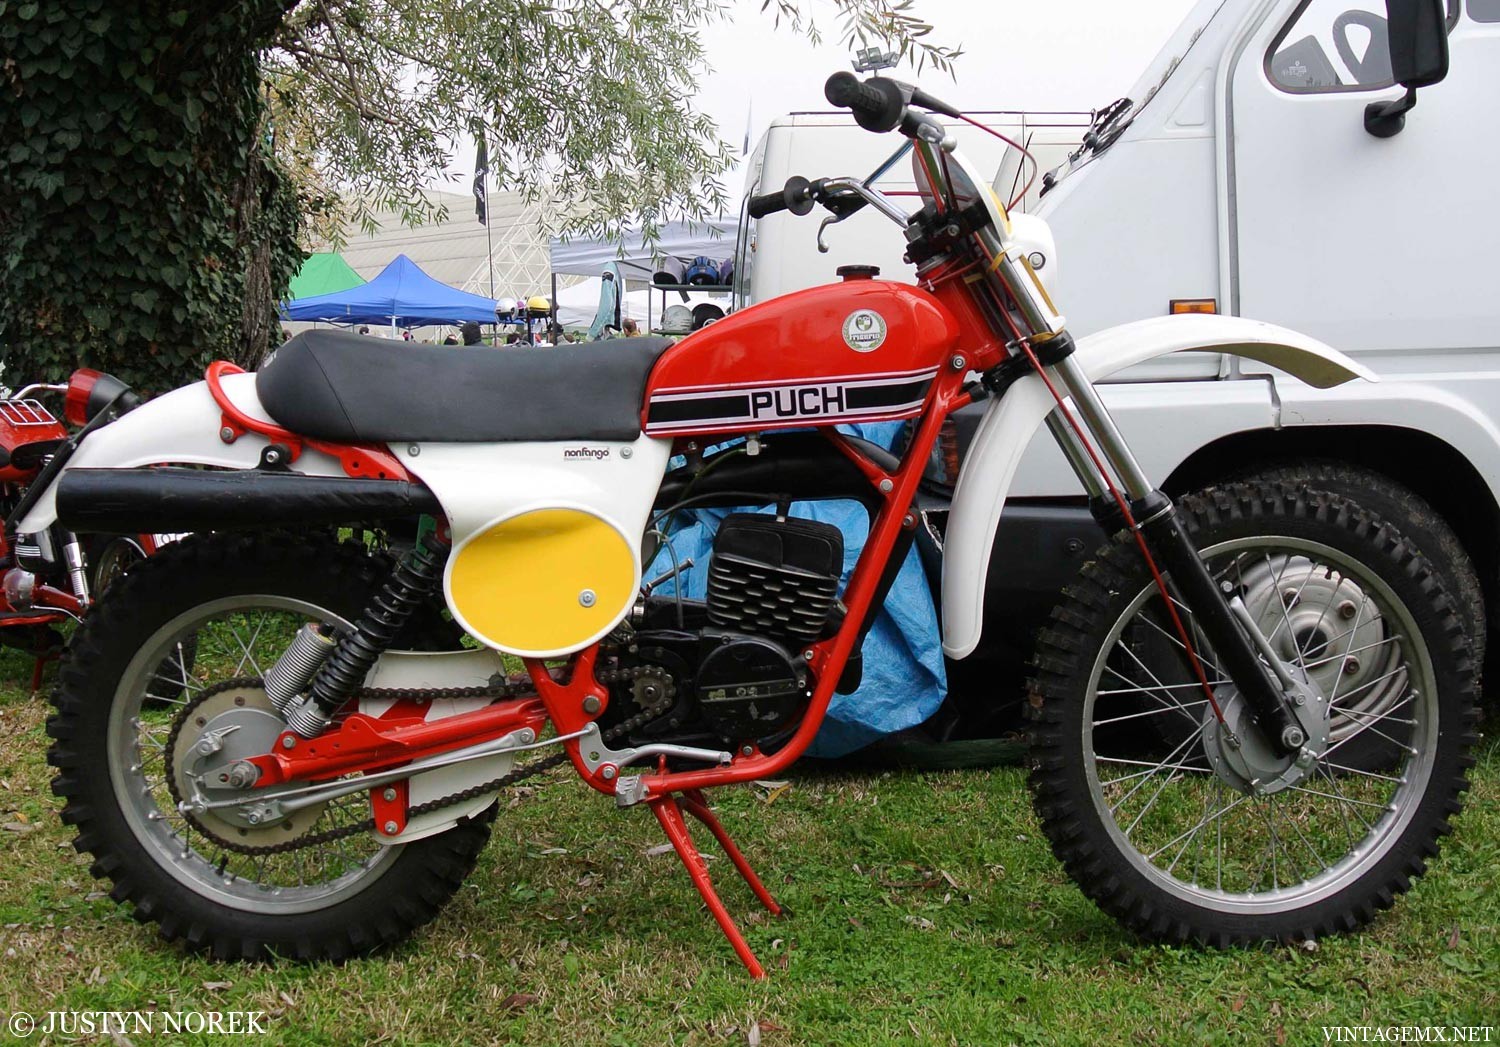 1972 puch moped